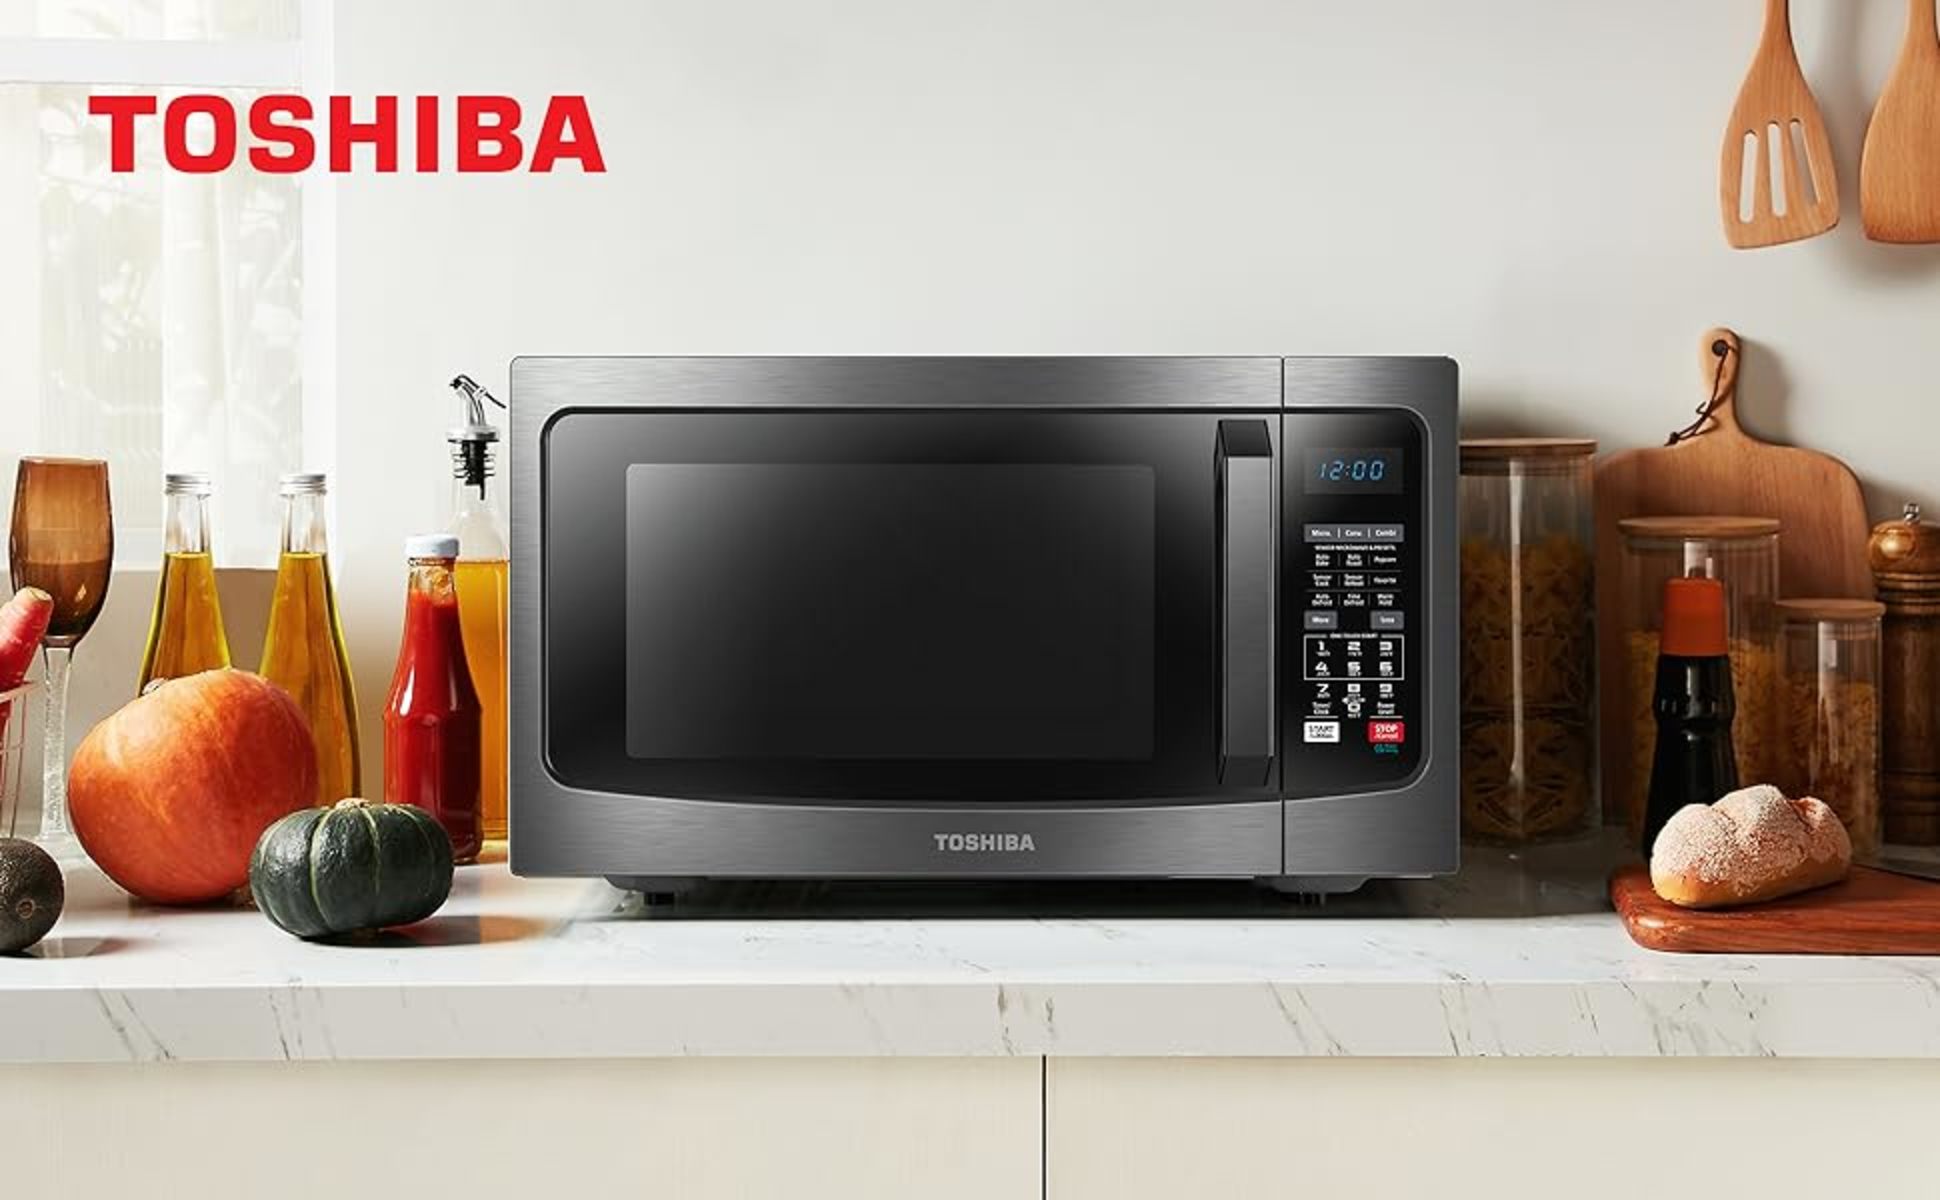 Toshiba EC042A5C-BS Microwave Oven Review - Consumer Reports